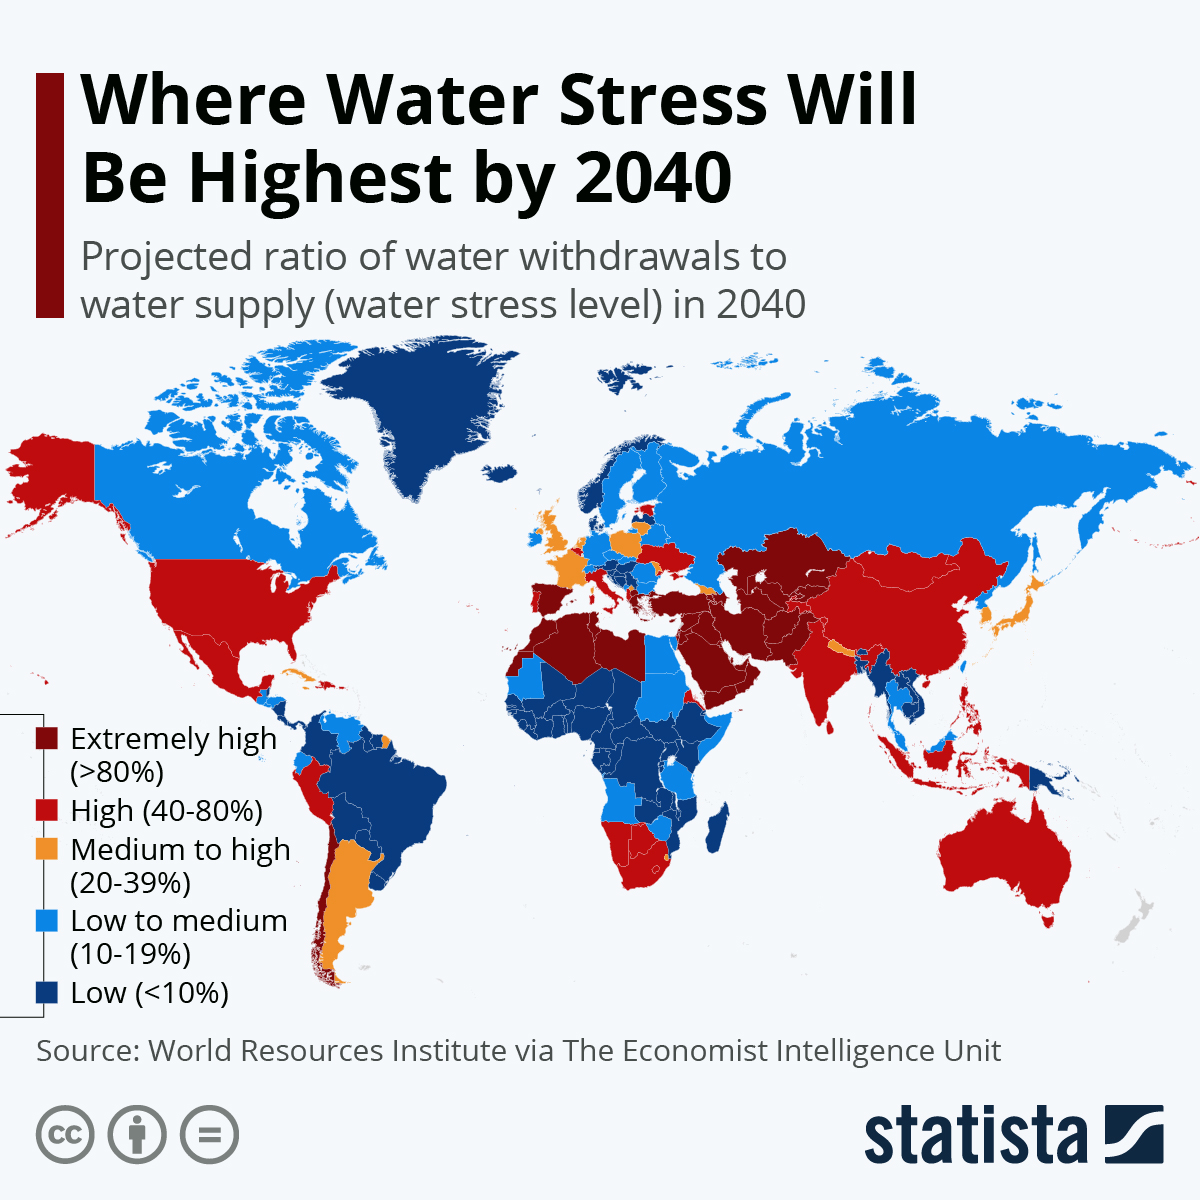 Where Water Stress Will Be Highest by 2040